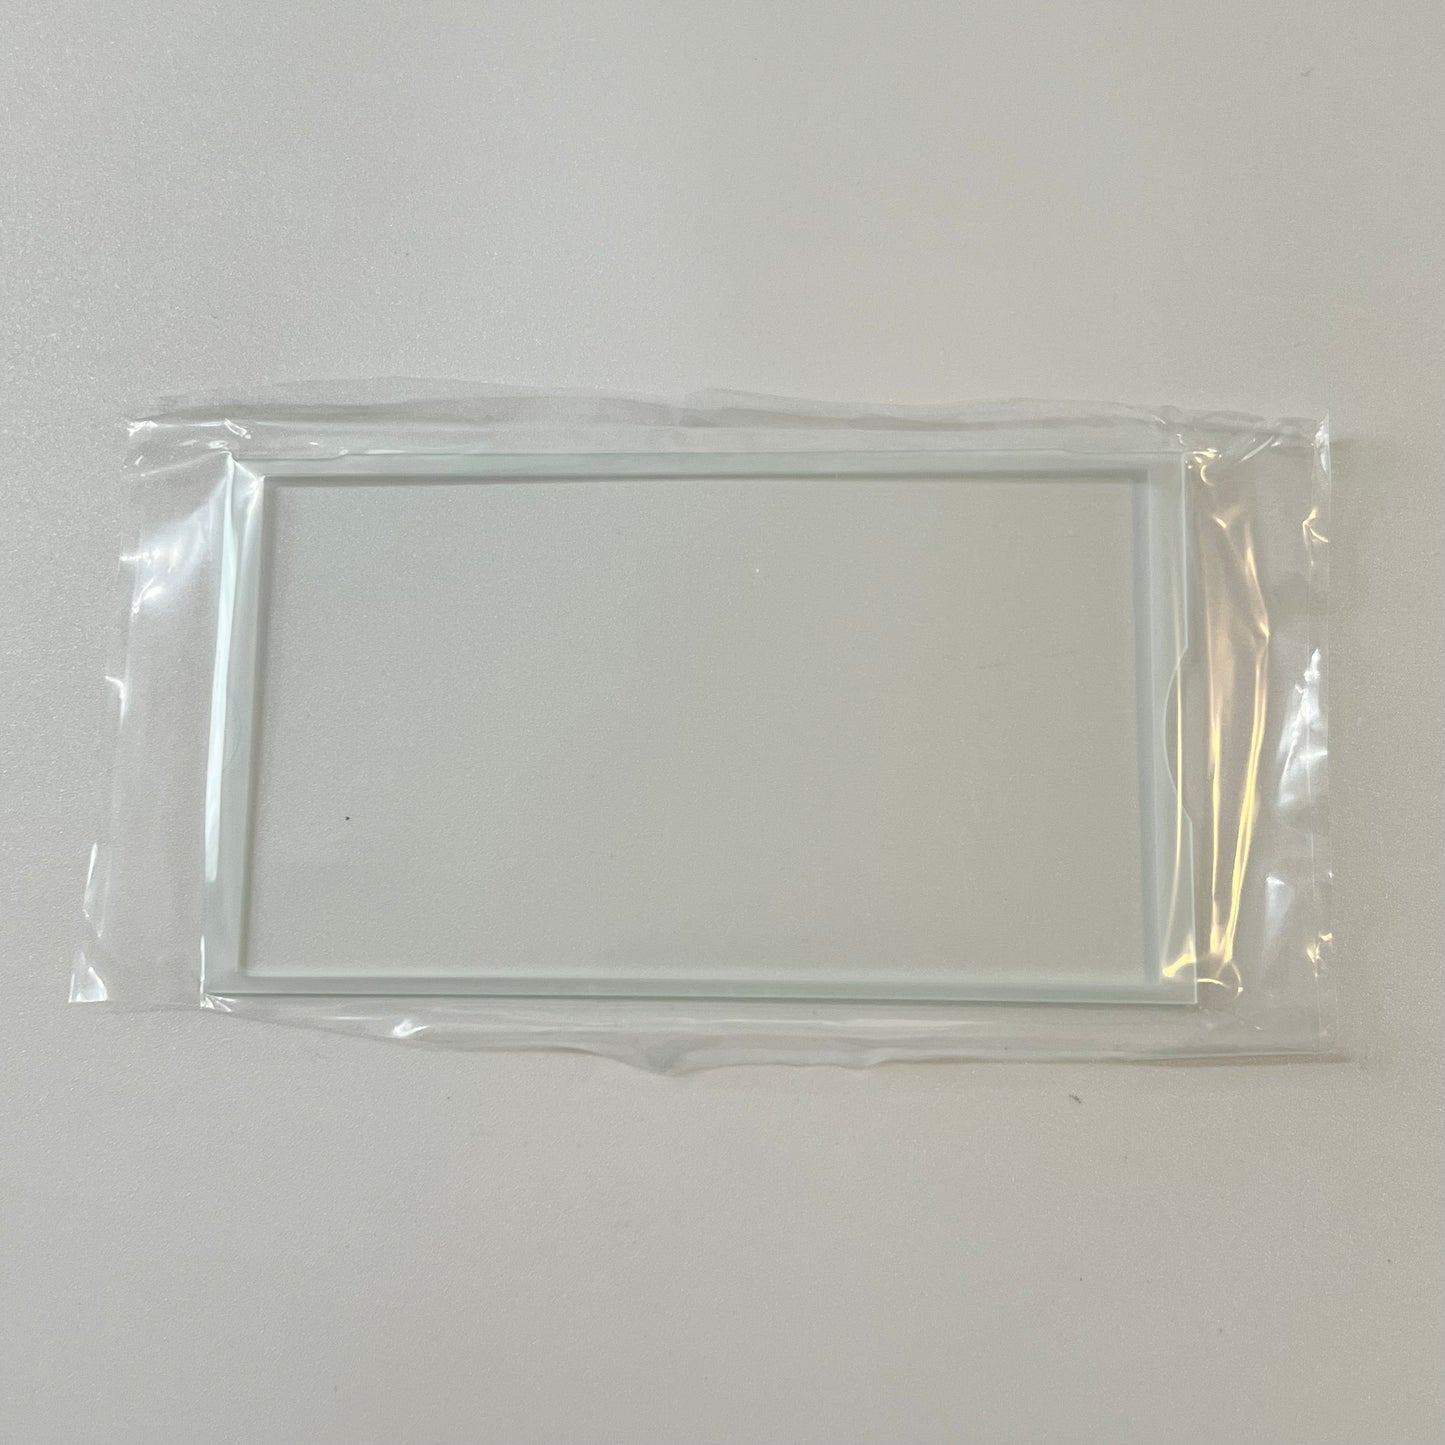 Glass Sony PSP Replacement Lens